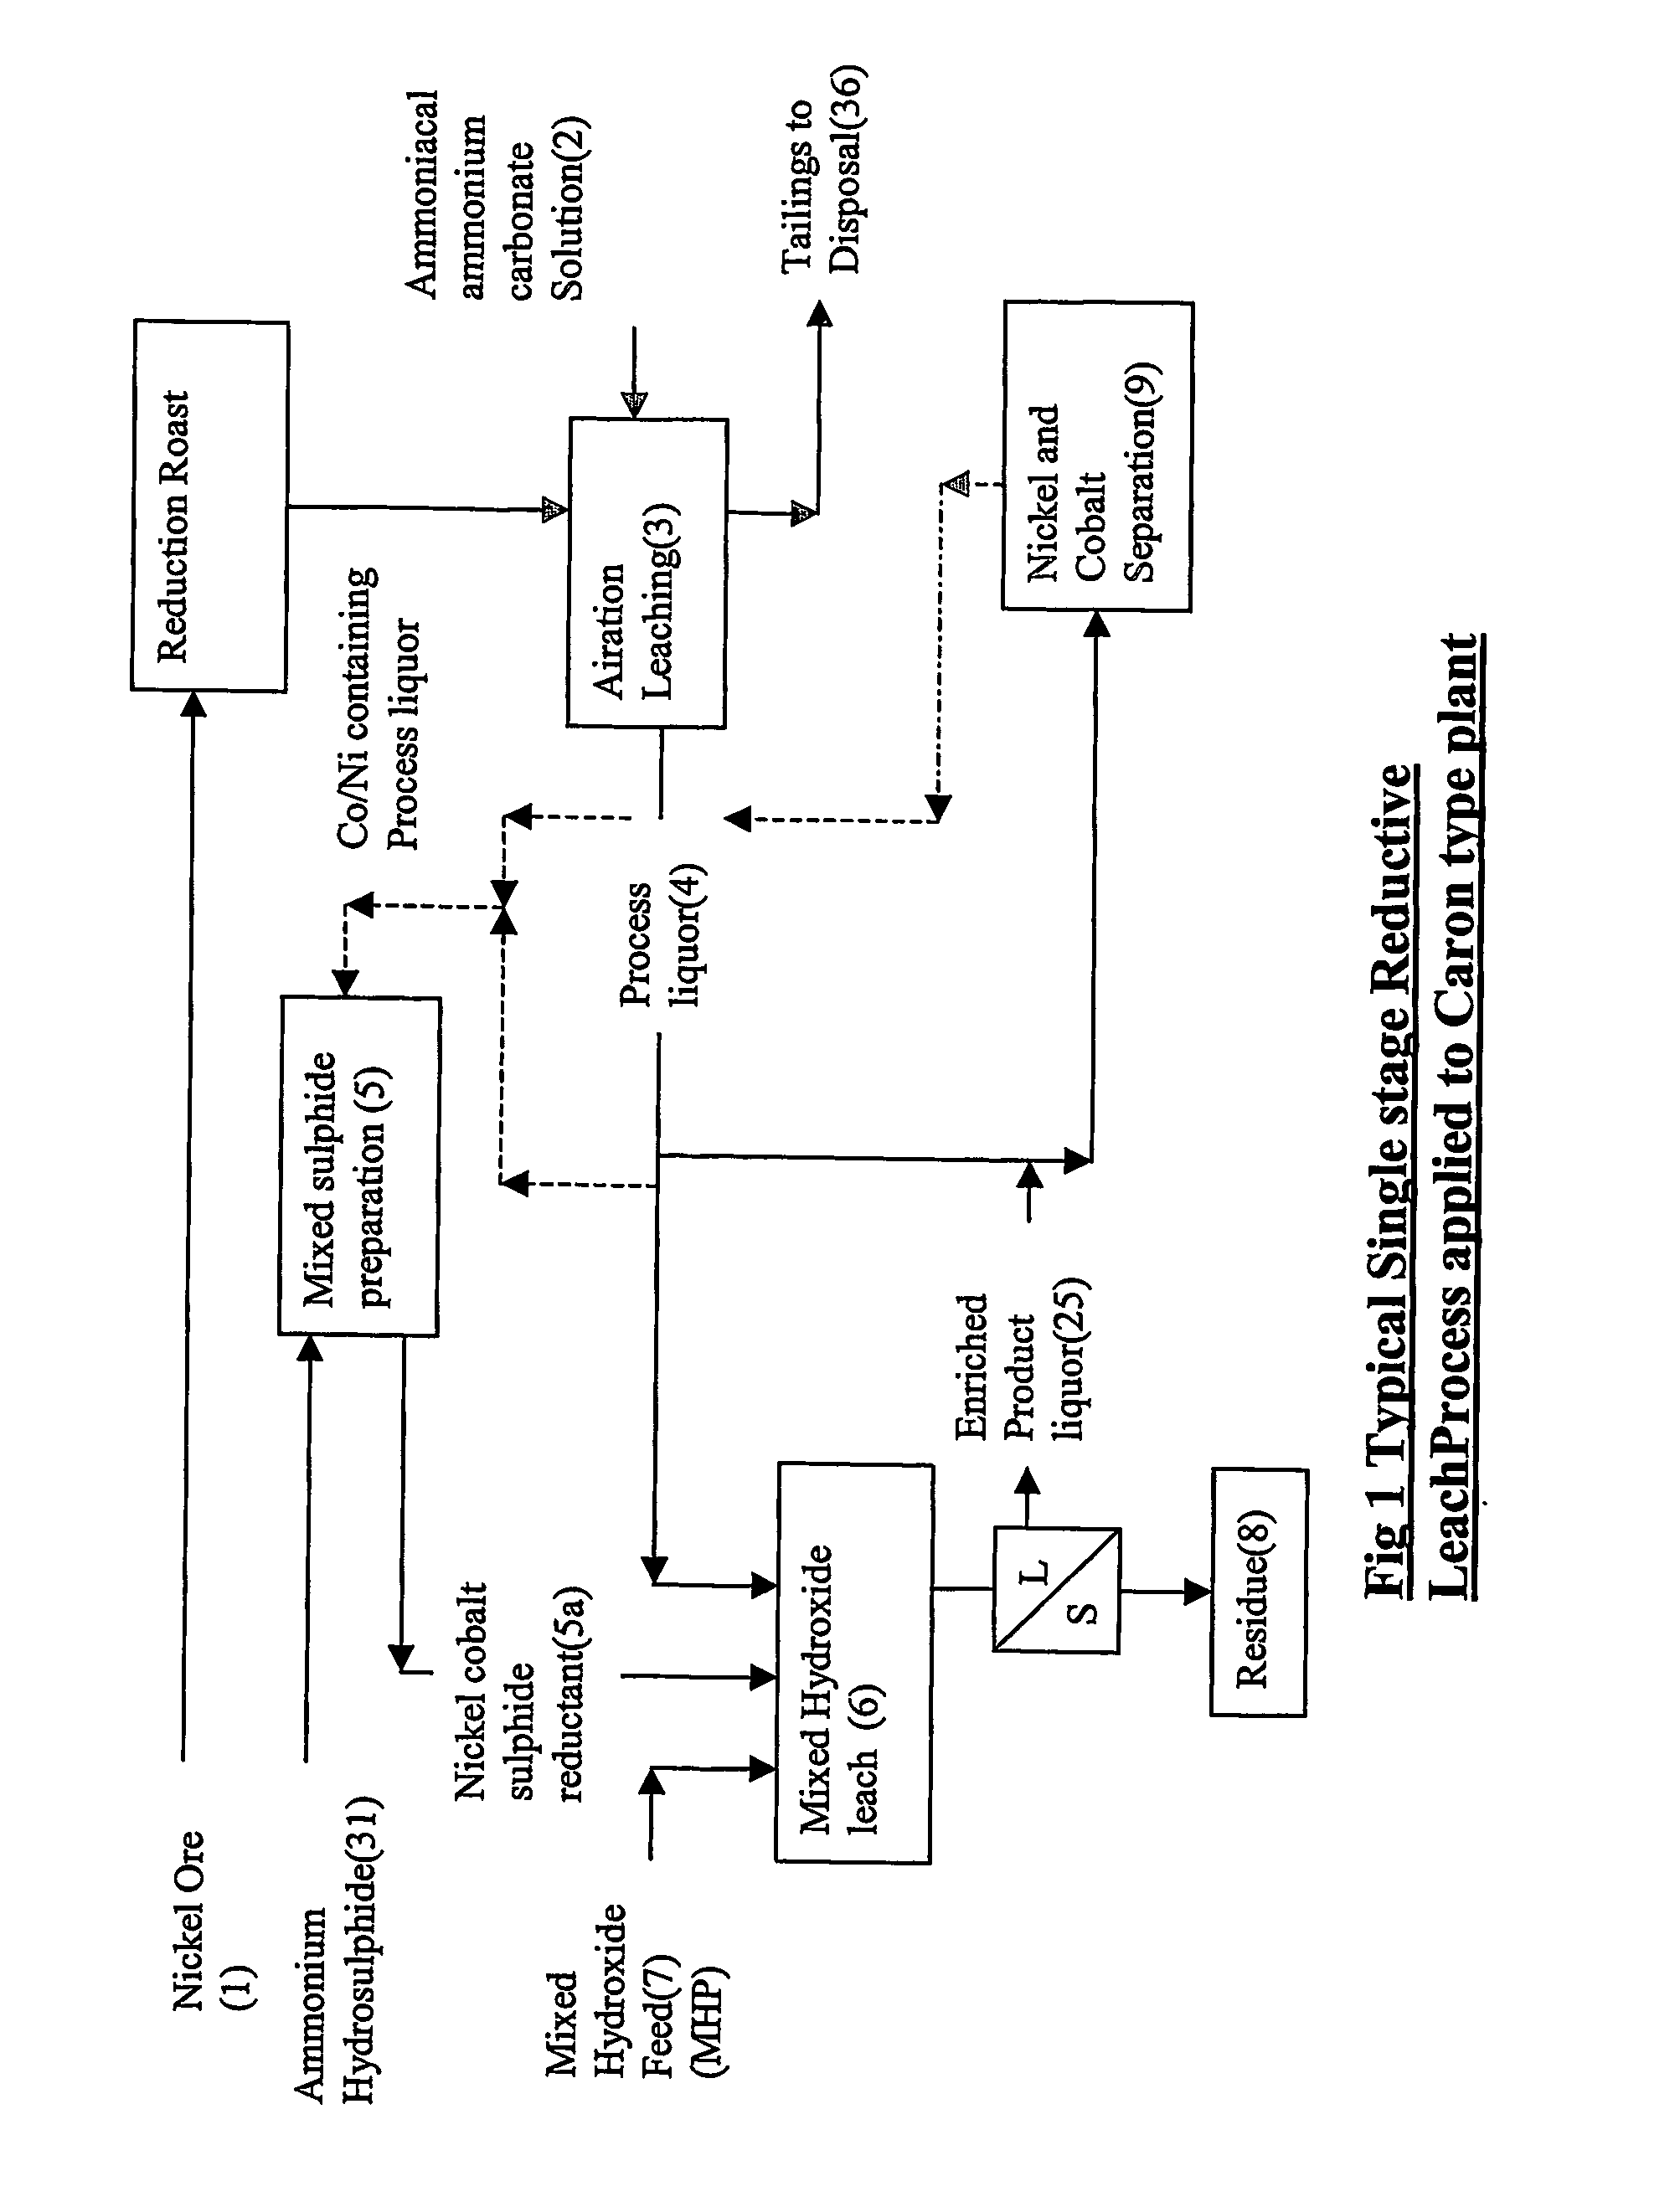 Reductive ammoniacal leaching of nickel and coblat bearing